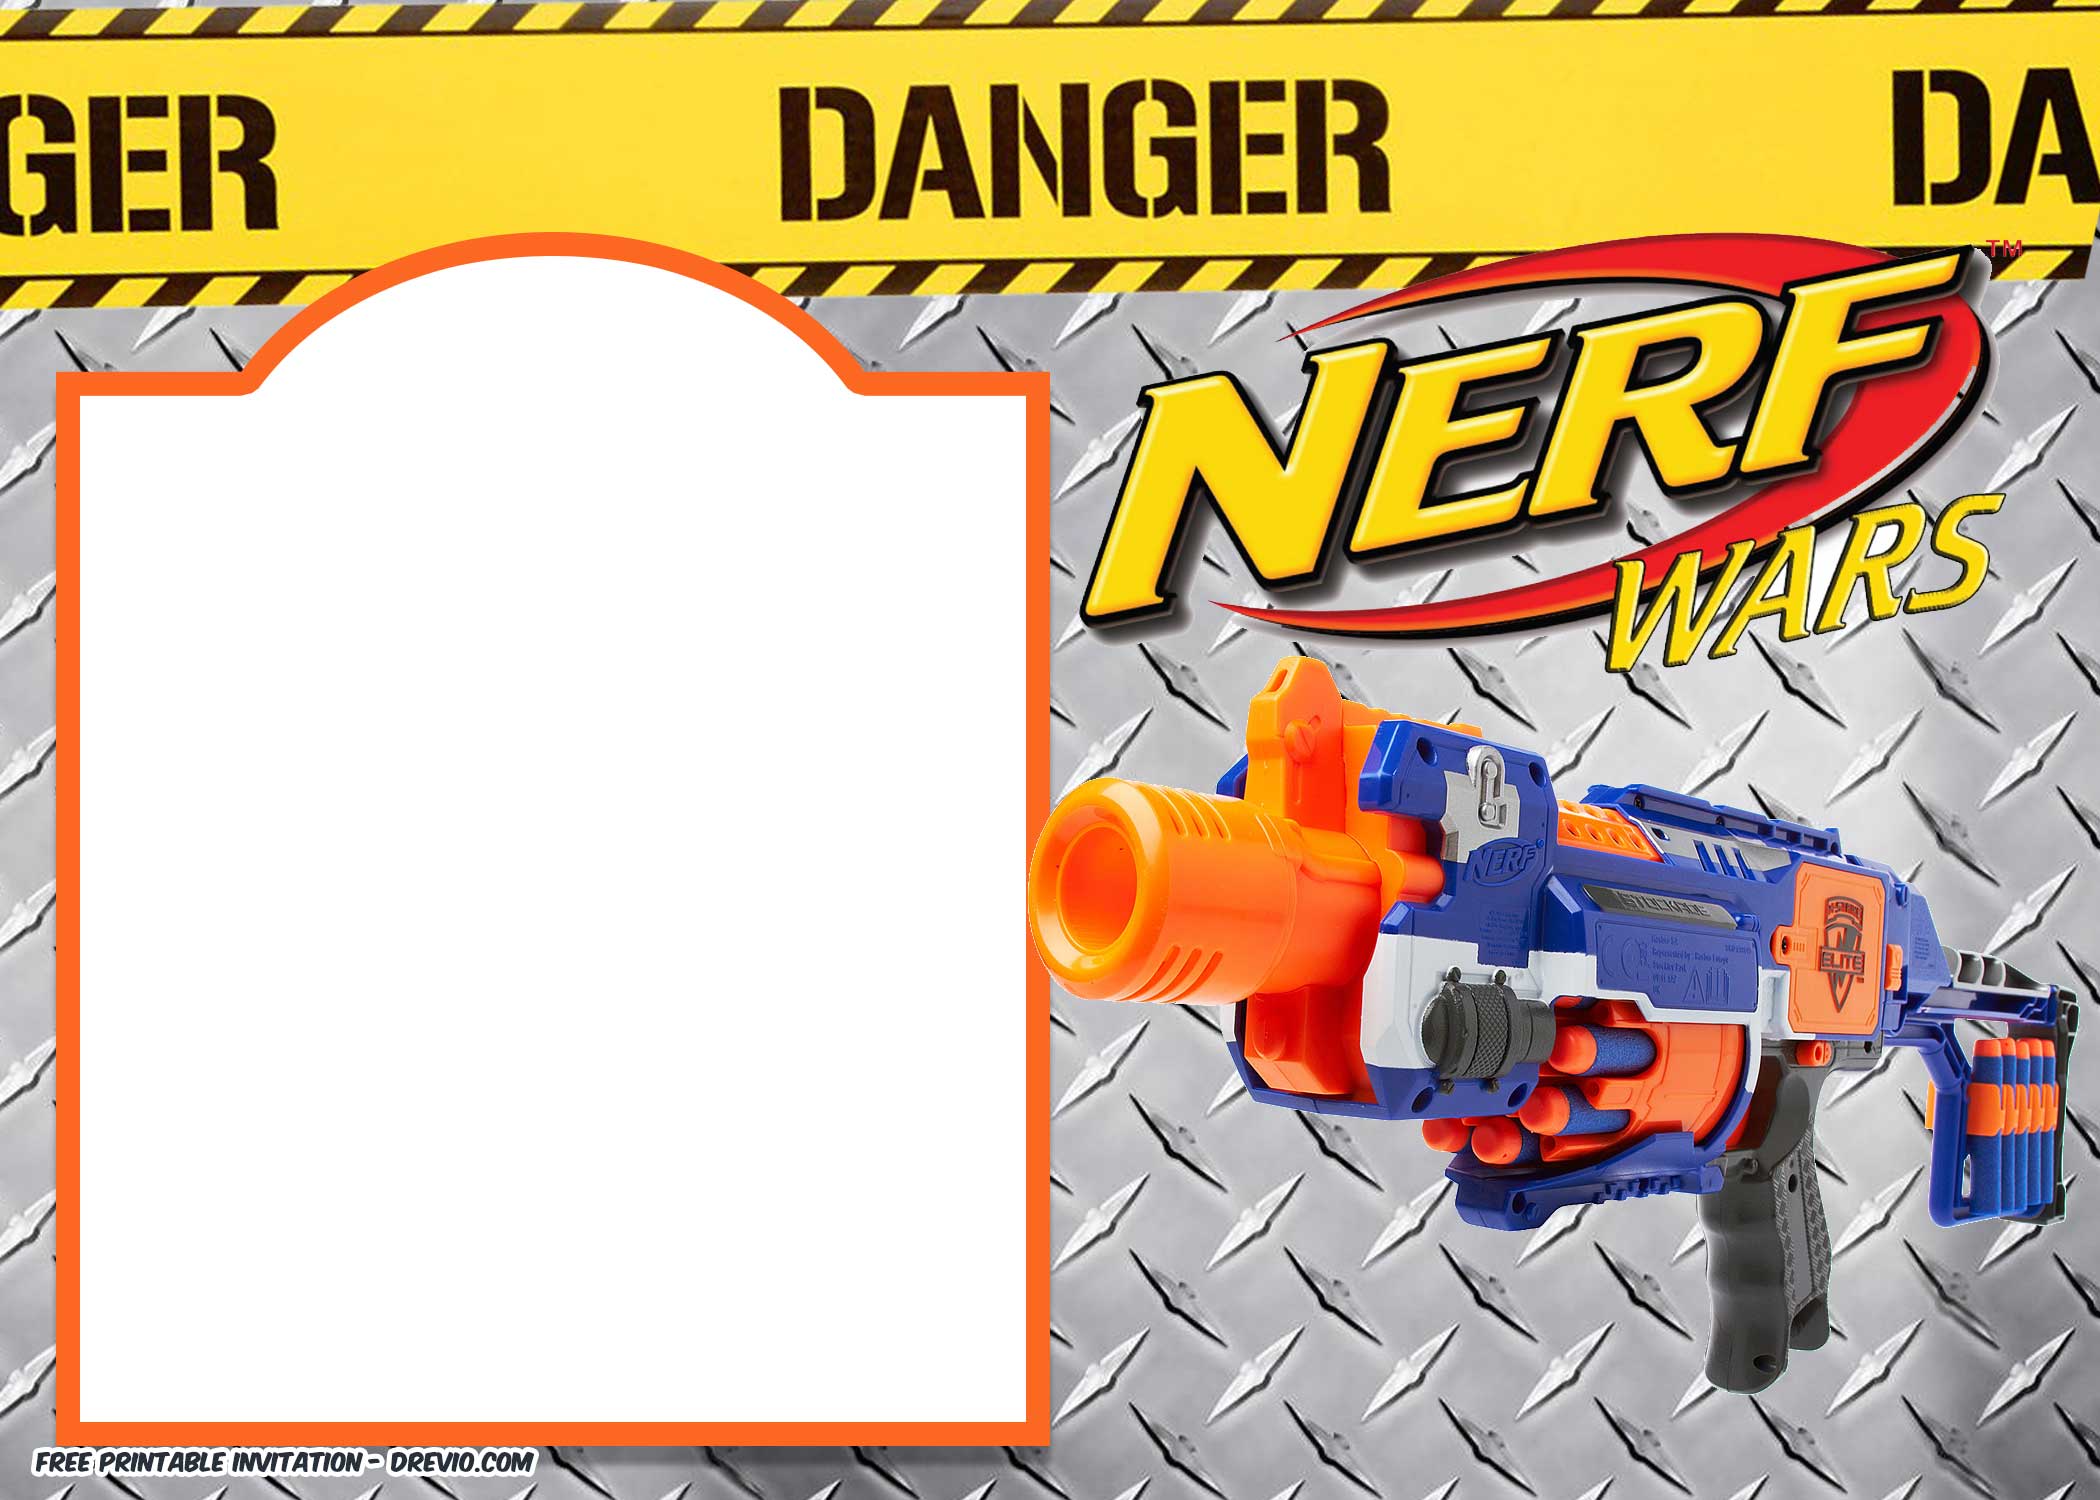 nerf-gun-party-invitation-templates-download-hundreds-free